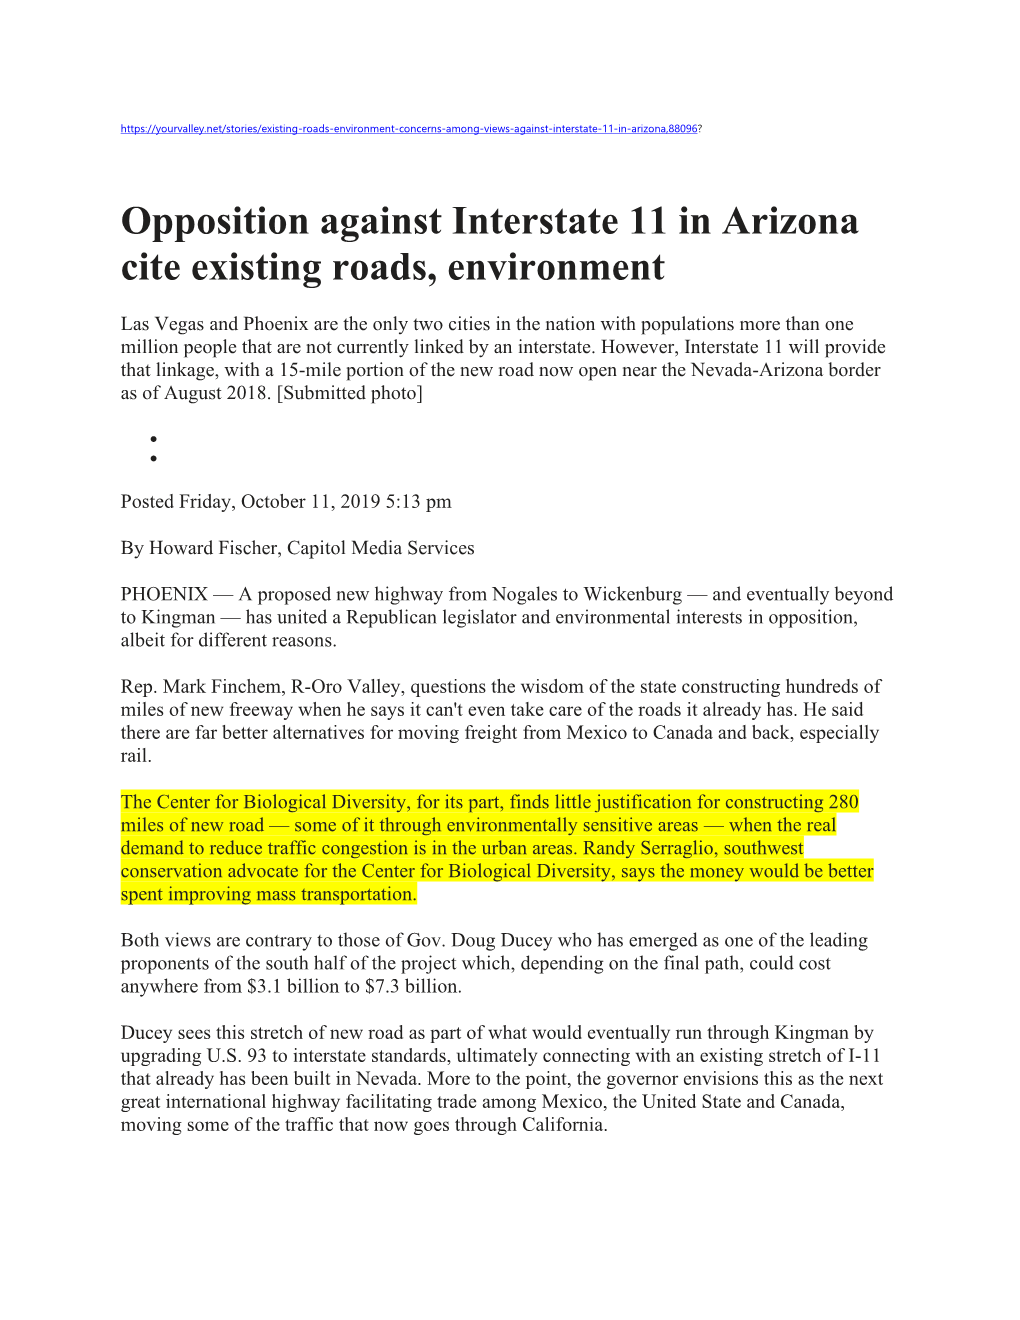 Opposition Against Interstate 11 in Arizona Cite Existing Roads, Environment